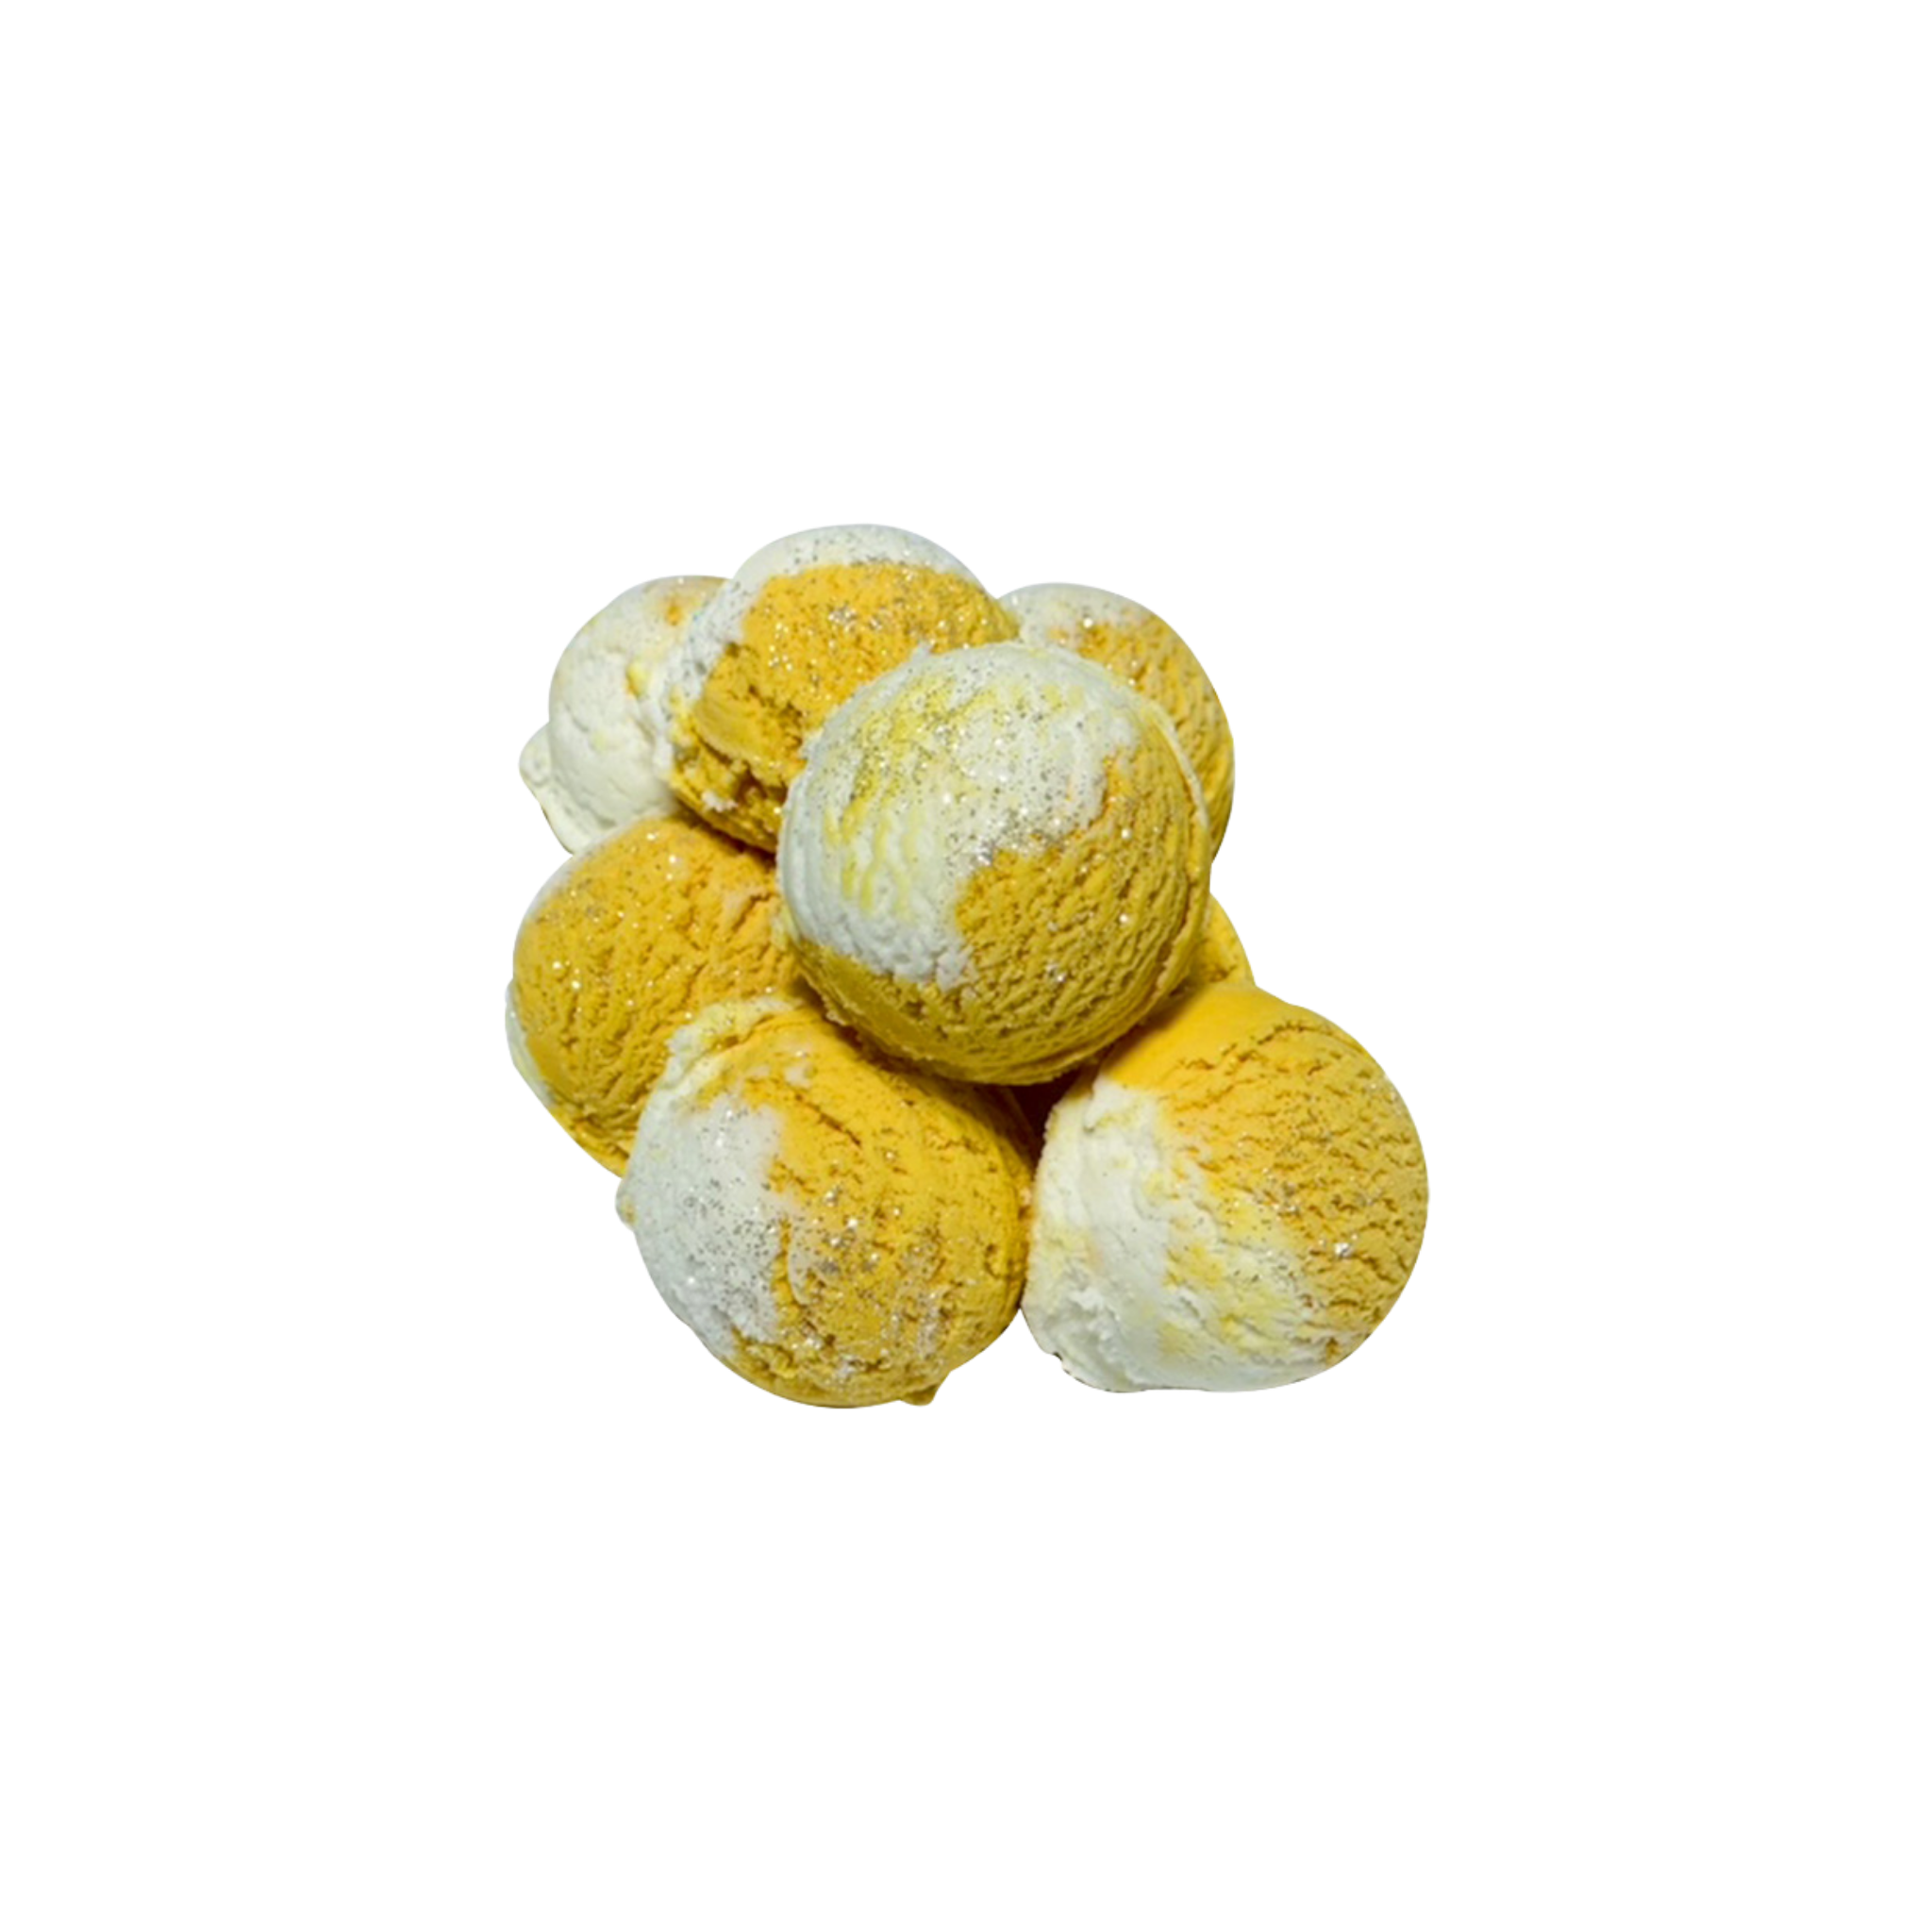 Dream Slice Bubble Scoop bath bomb made natural wholesale handmade bath products private label made in usa.png